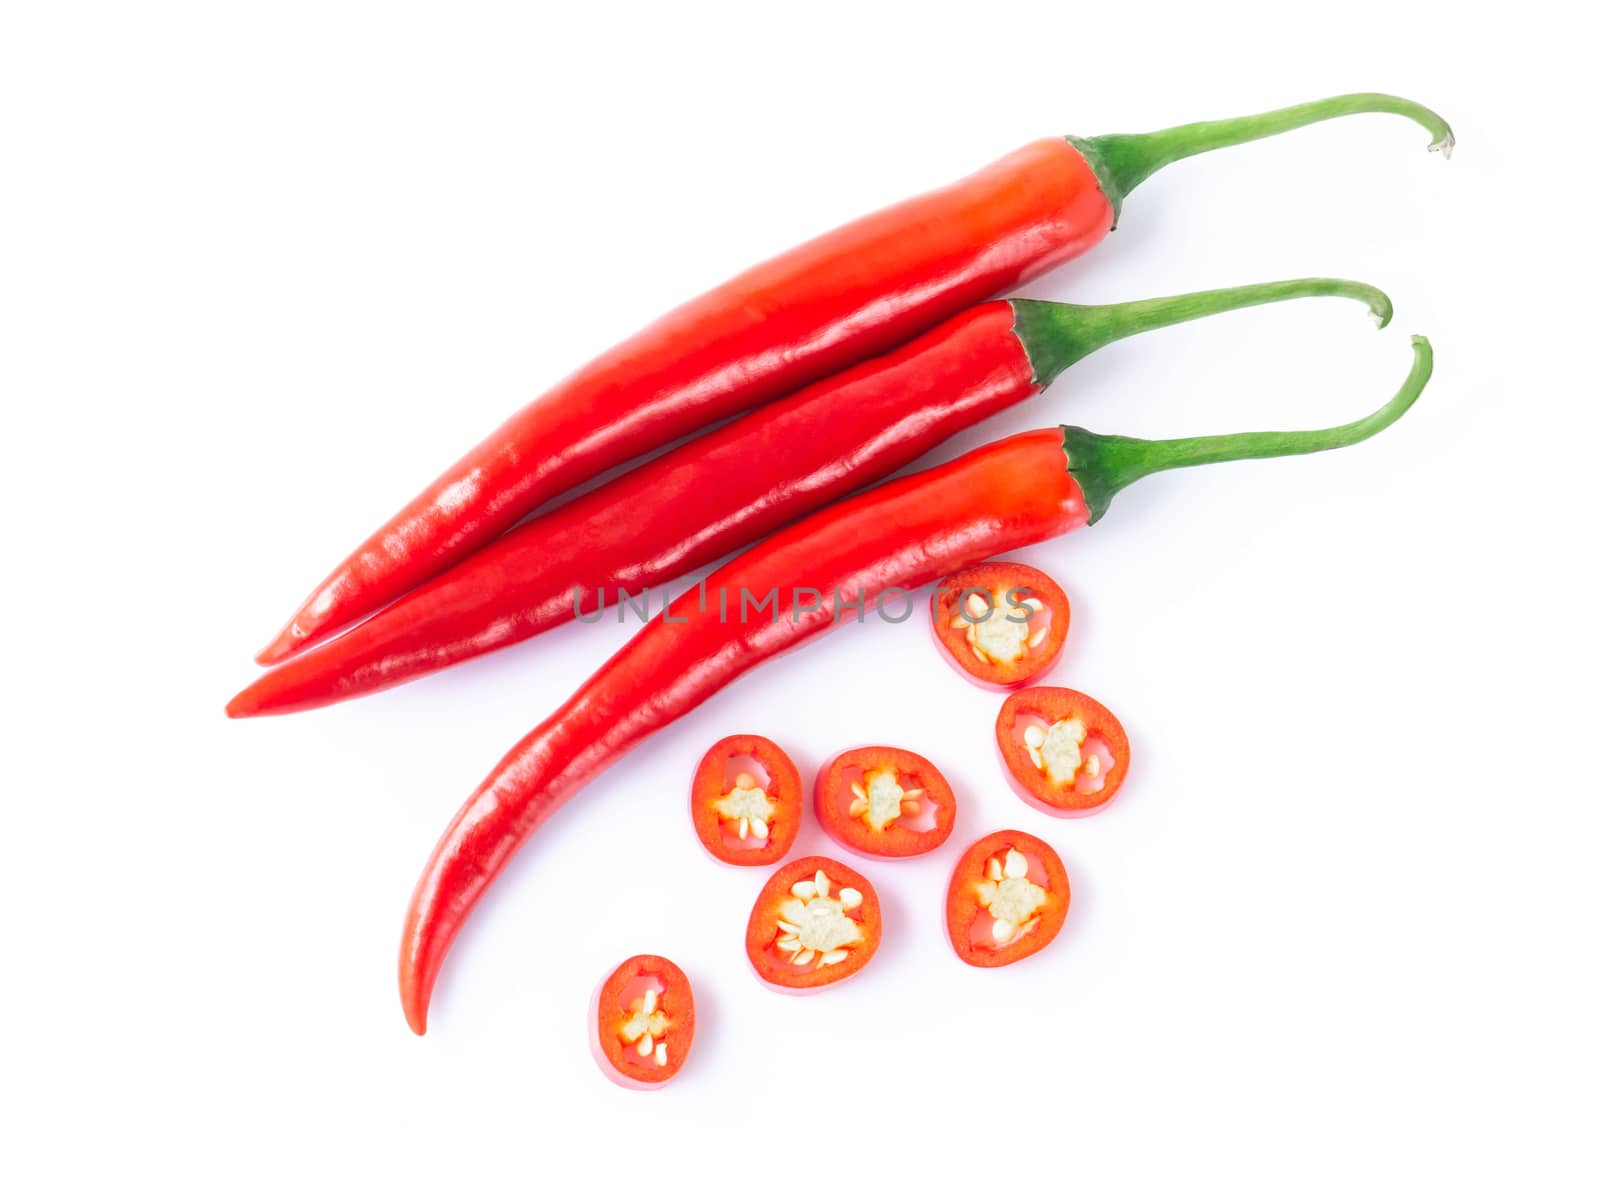 Red chili pepper sliced on white background, raw food ingredient by pt.pongsak@gmail.com